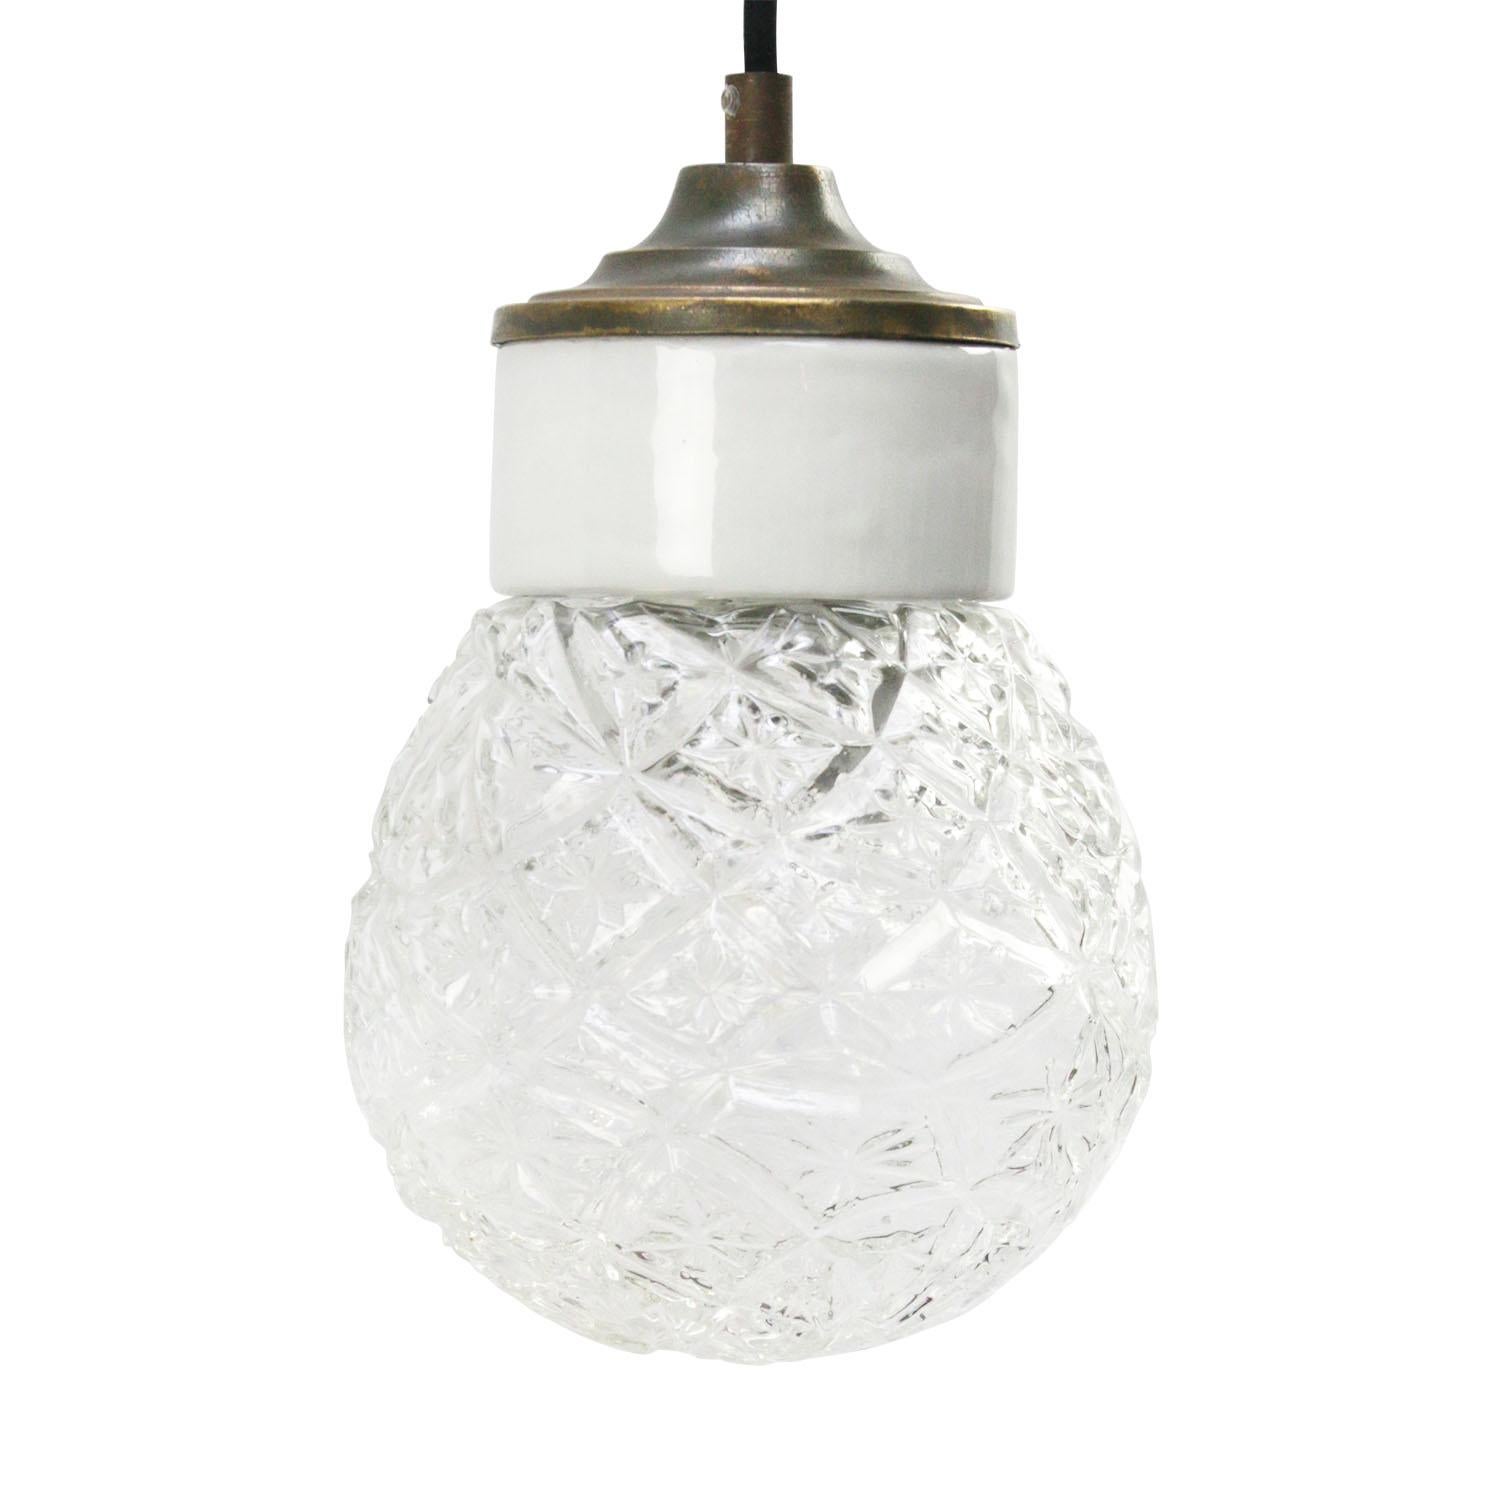 Porcelain industrial hanging lamp.
White porcelain, brass and clear texture glass.
2 conductors, no ground.

Weight: 1.20 kg / 2.6 lb

Priced per individual item. All lamps have been made suitable by international standards for incandescent light